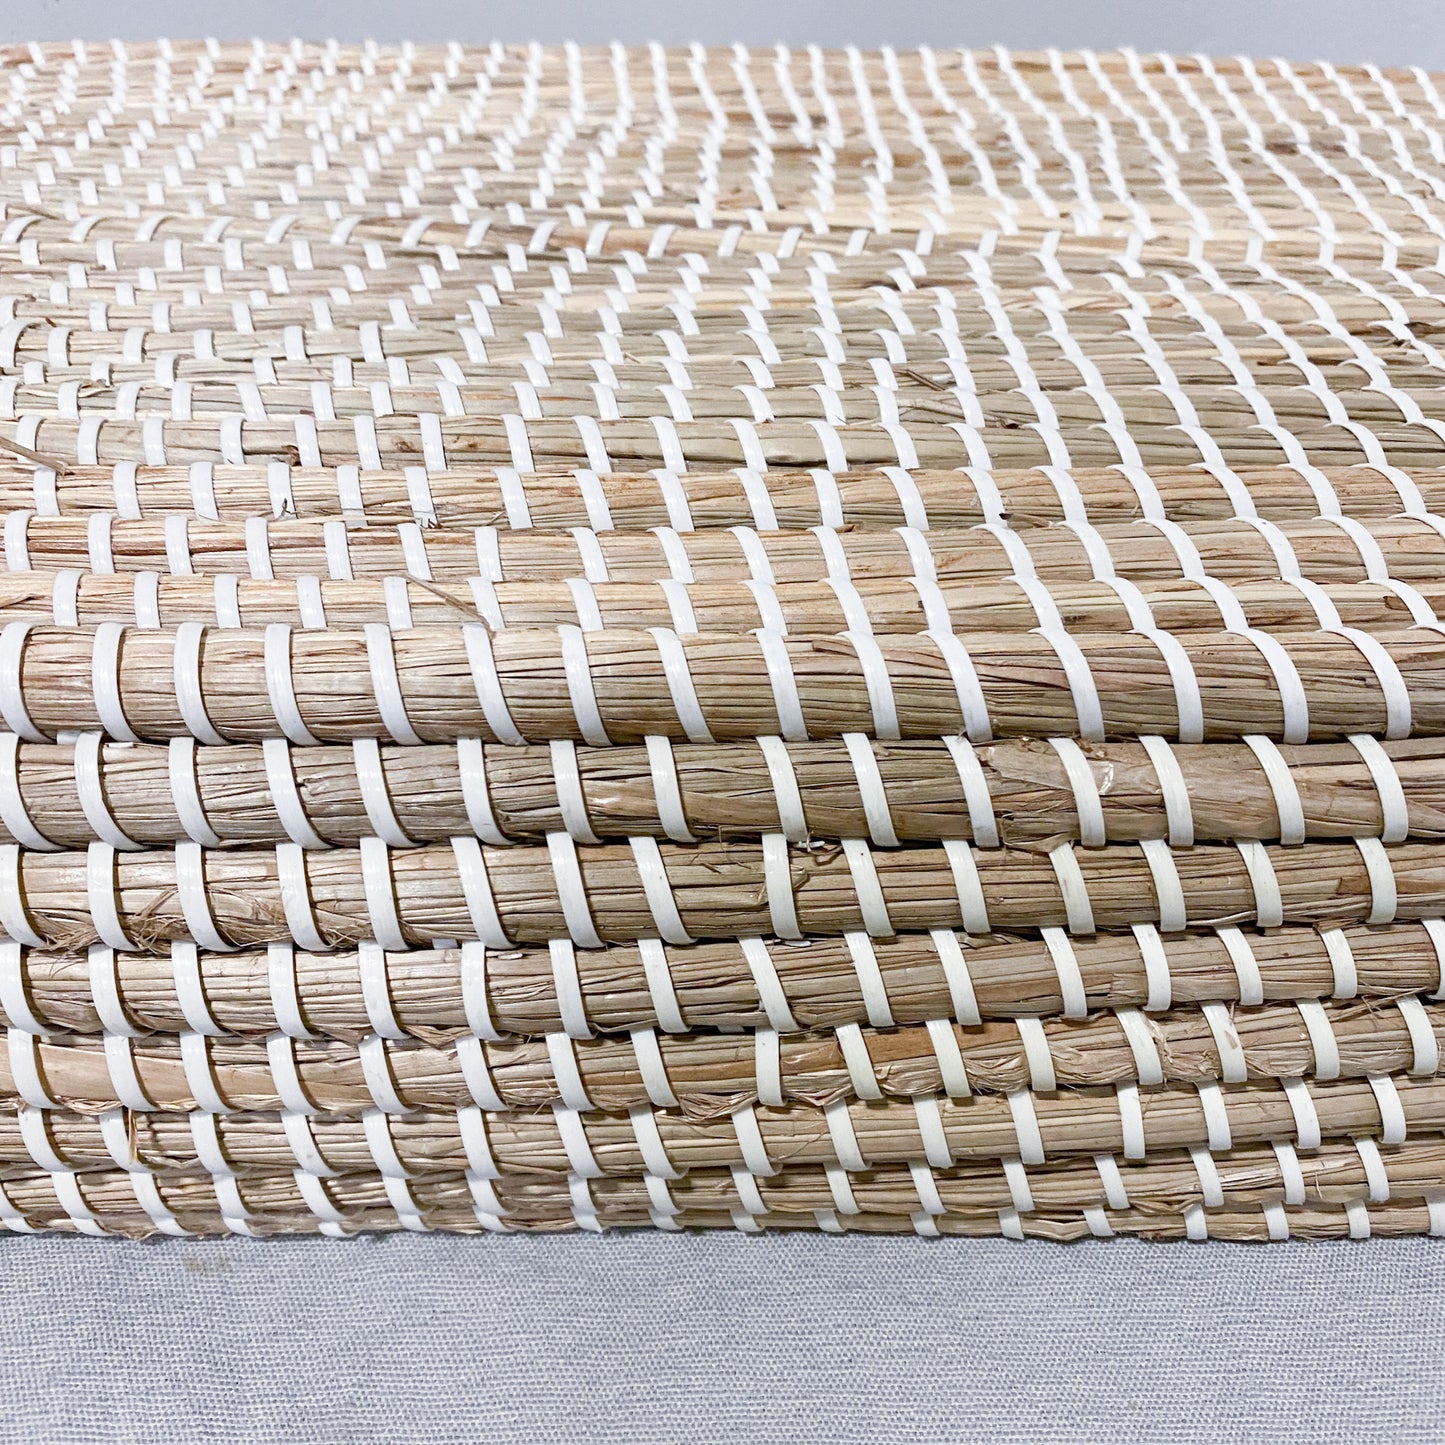 Reva Seagrass hand woven Changing Basket